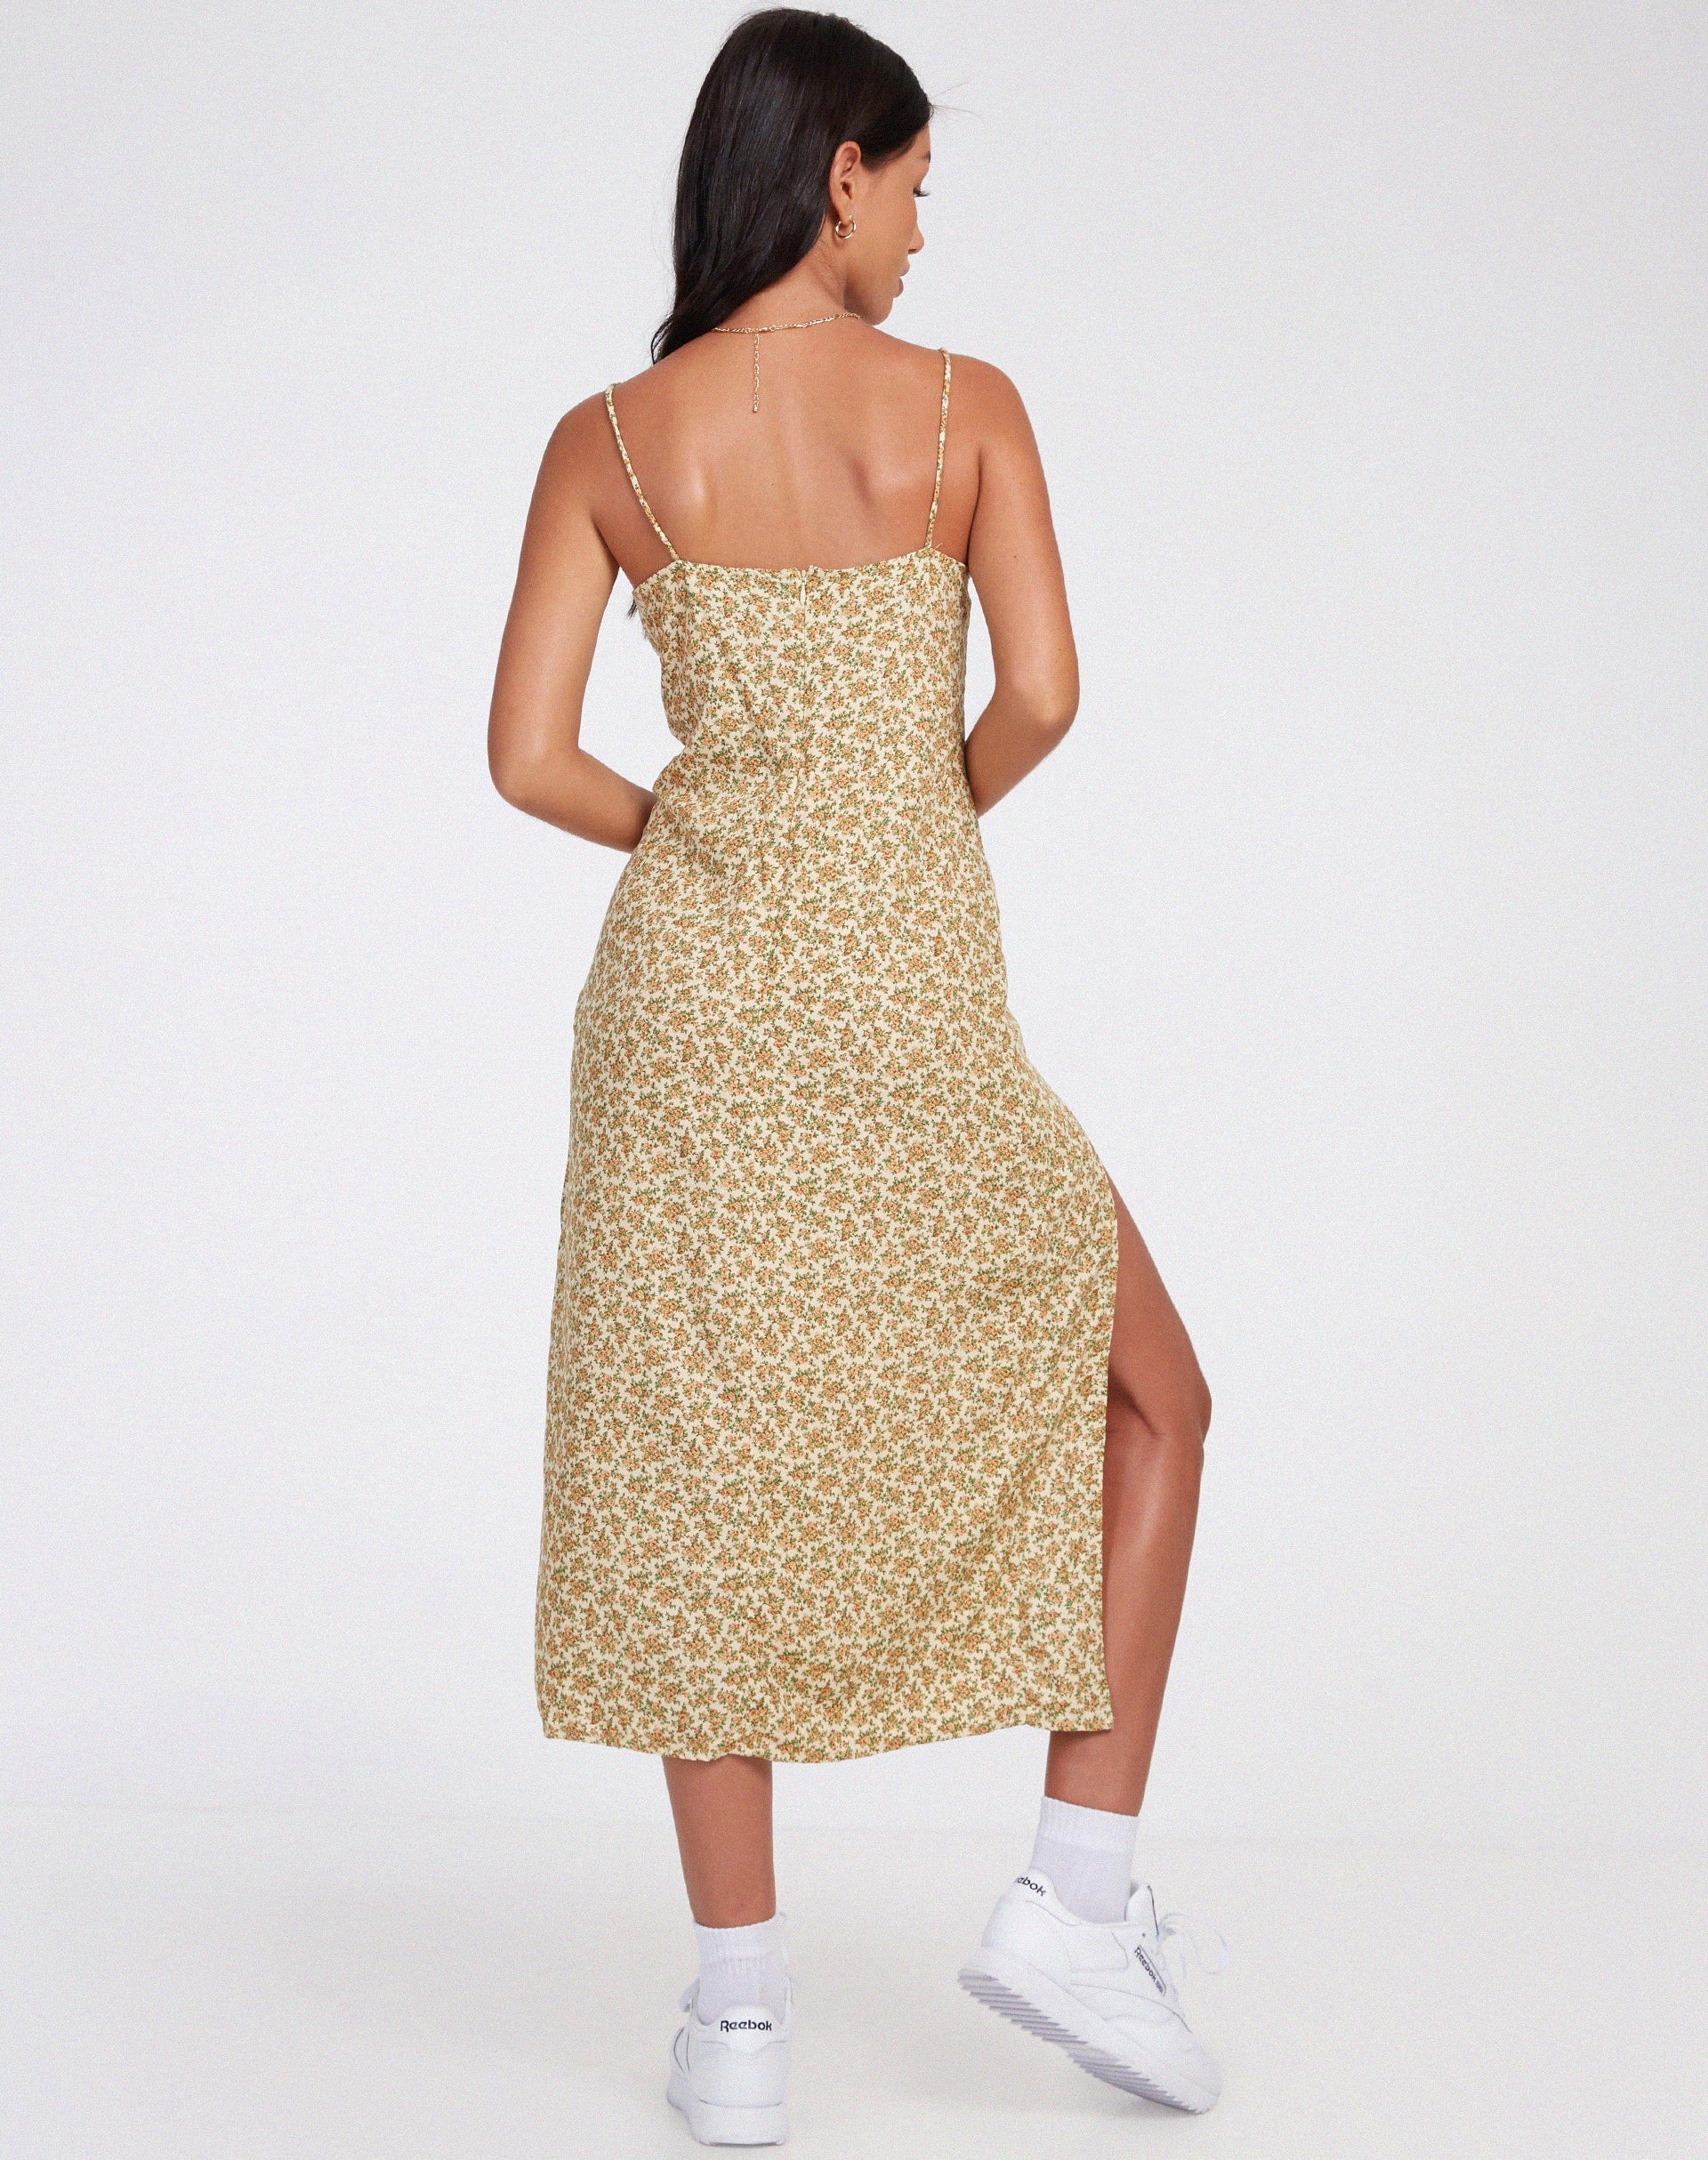 image of Cypress Midi Dress in Washed Ditsy